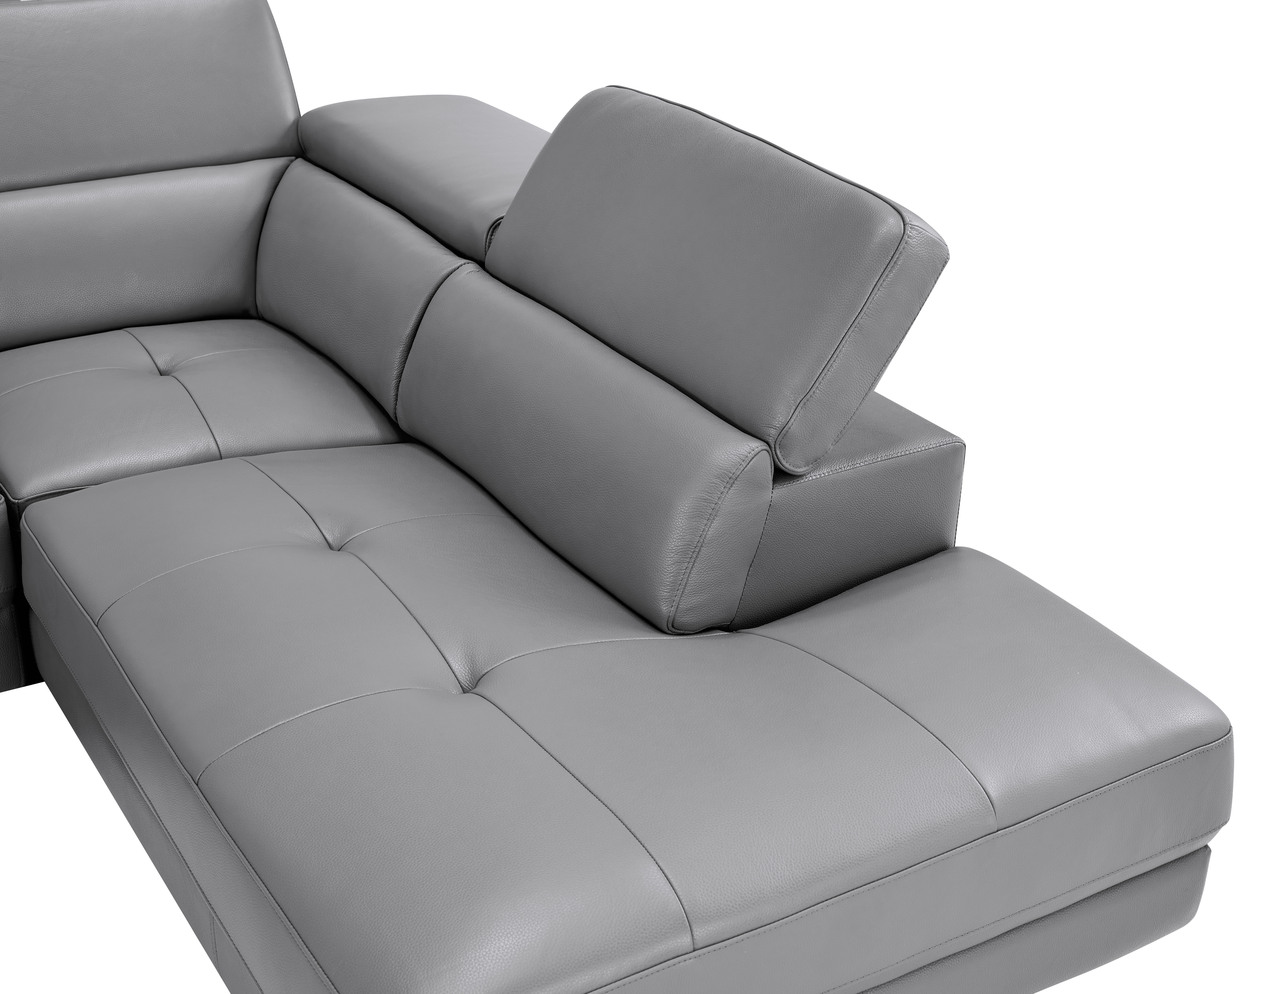 Advanced Adjustable Italian Top Grain Leather Sectional Sofa - Click Image to Close